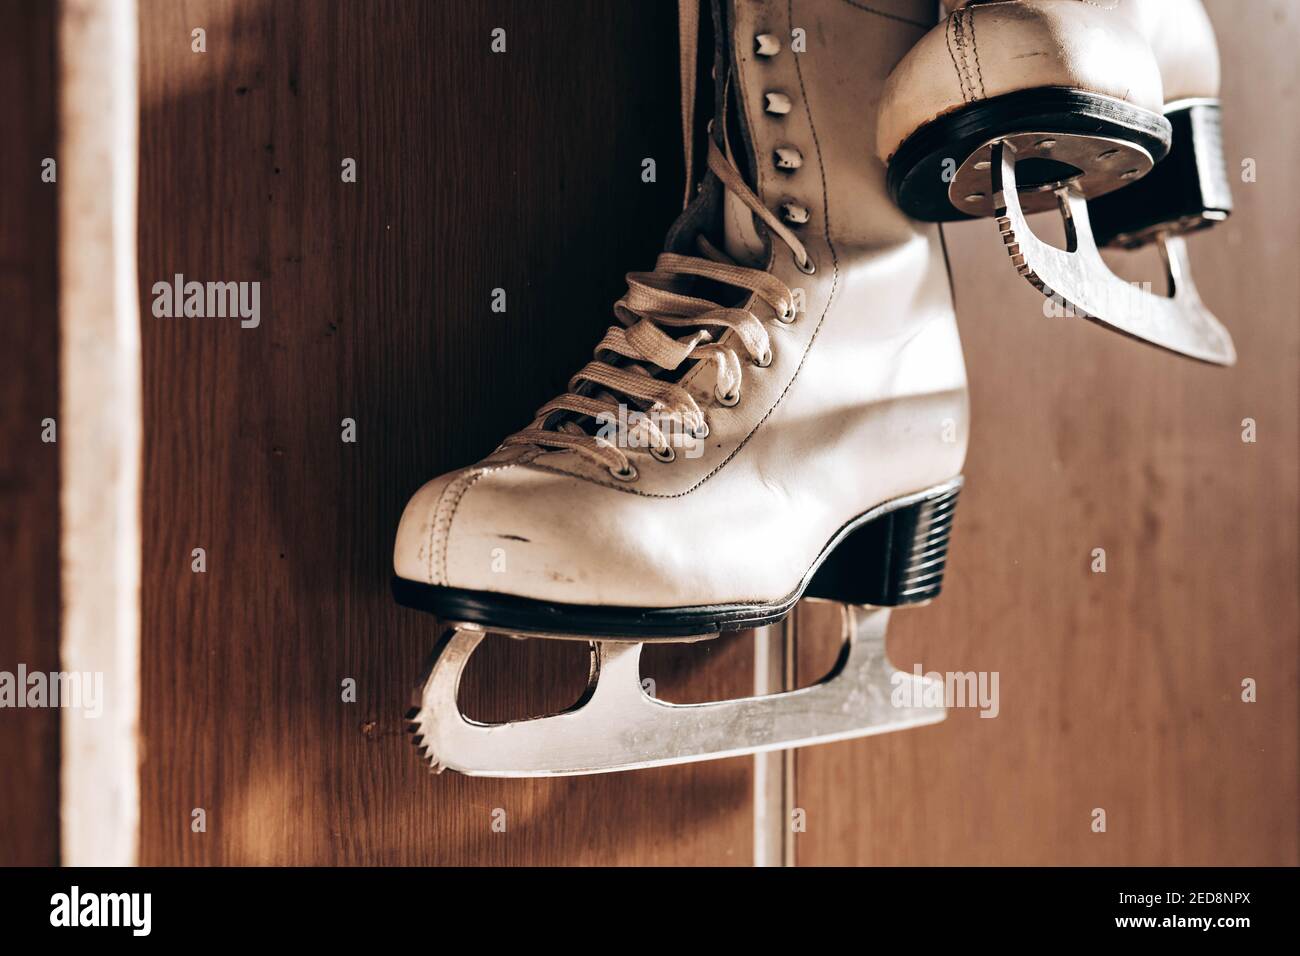 Old retro skates hanging on the wall Stock Photo